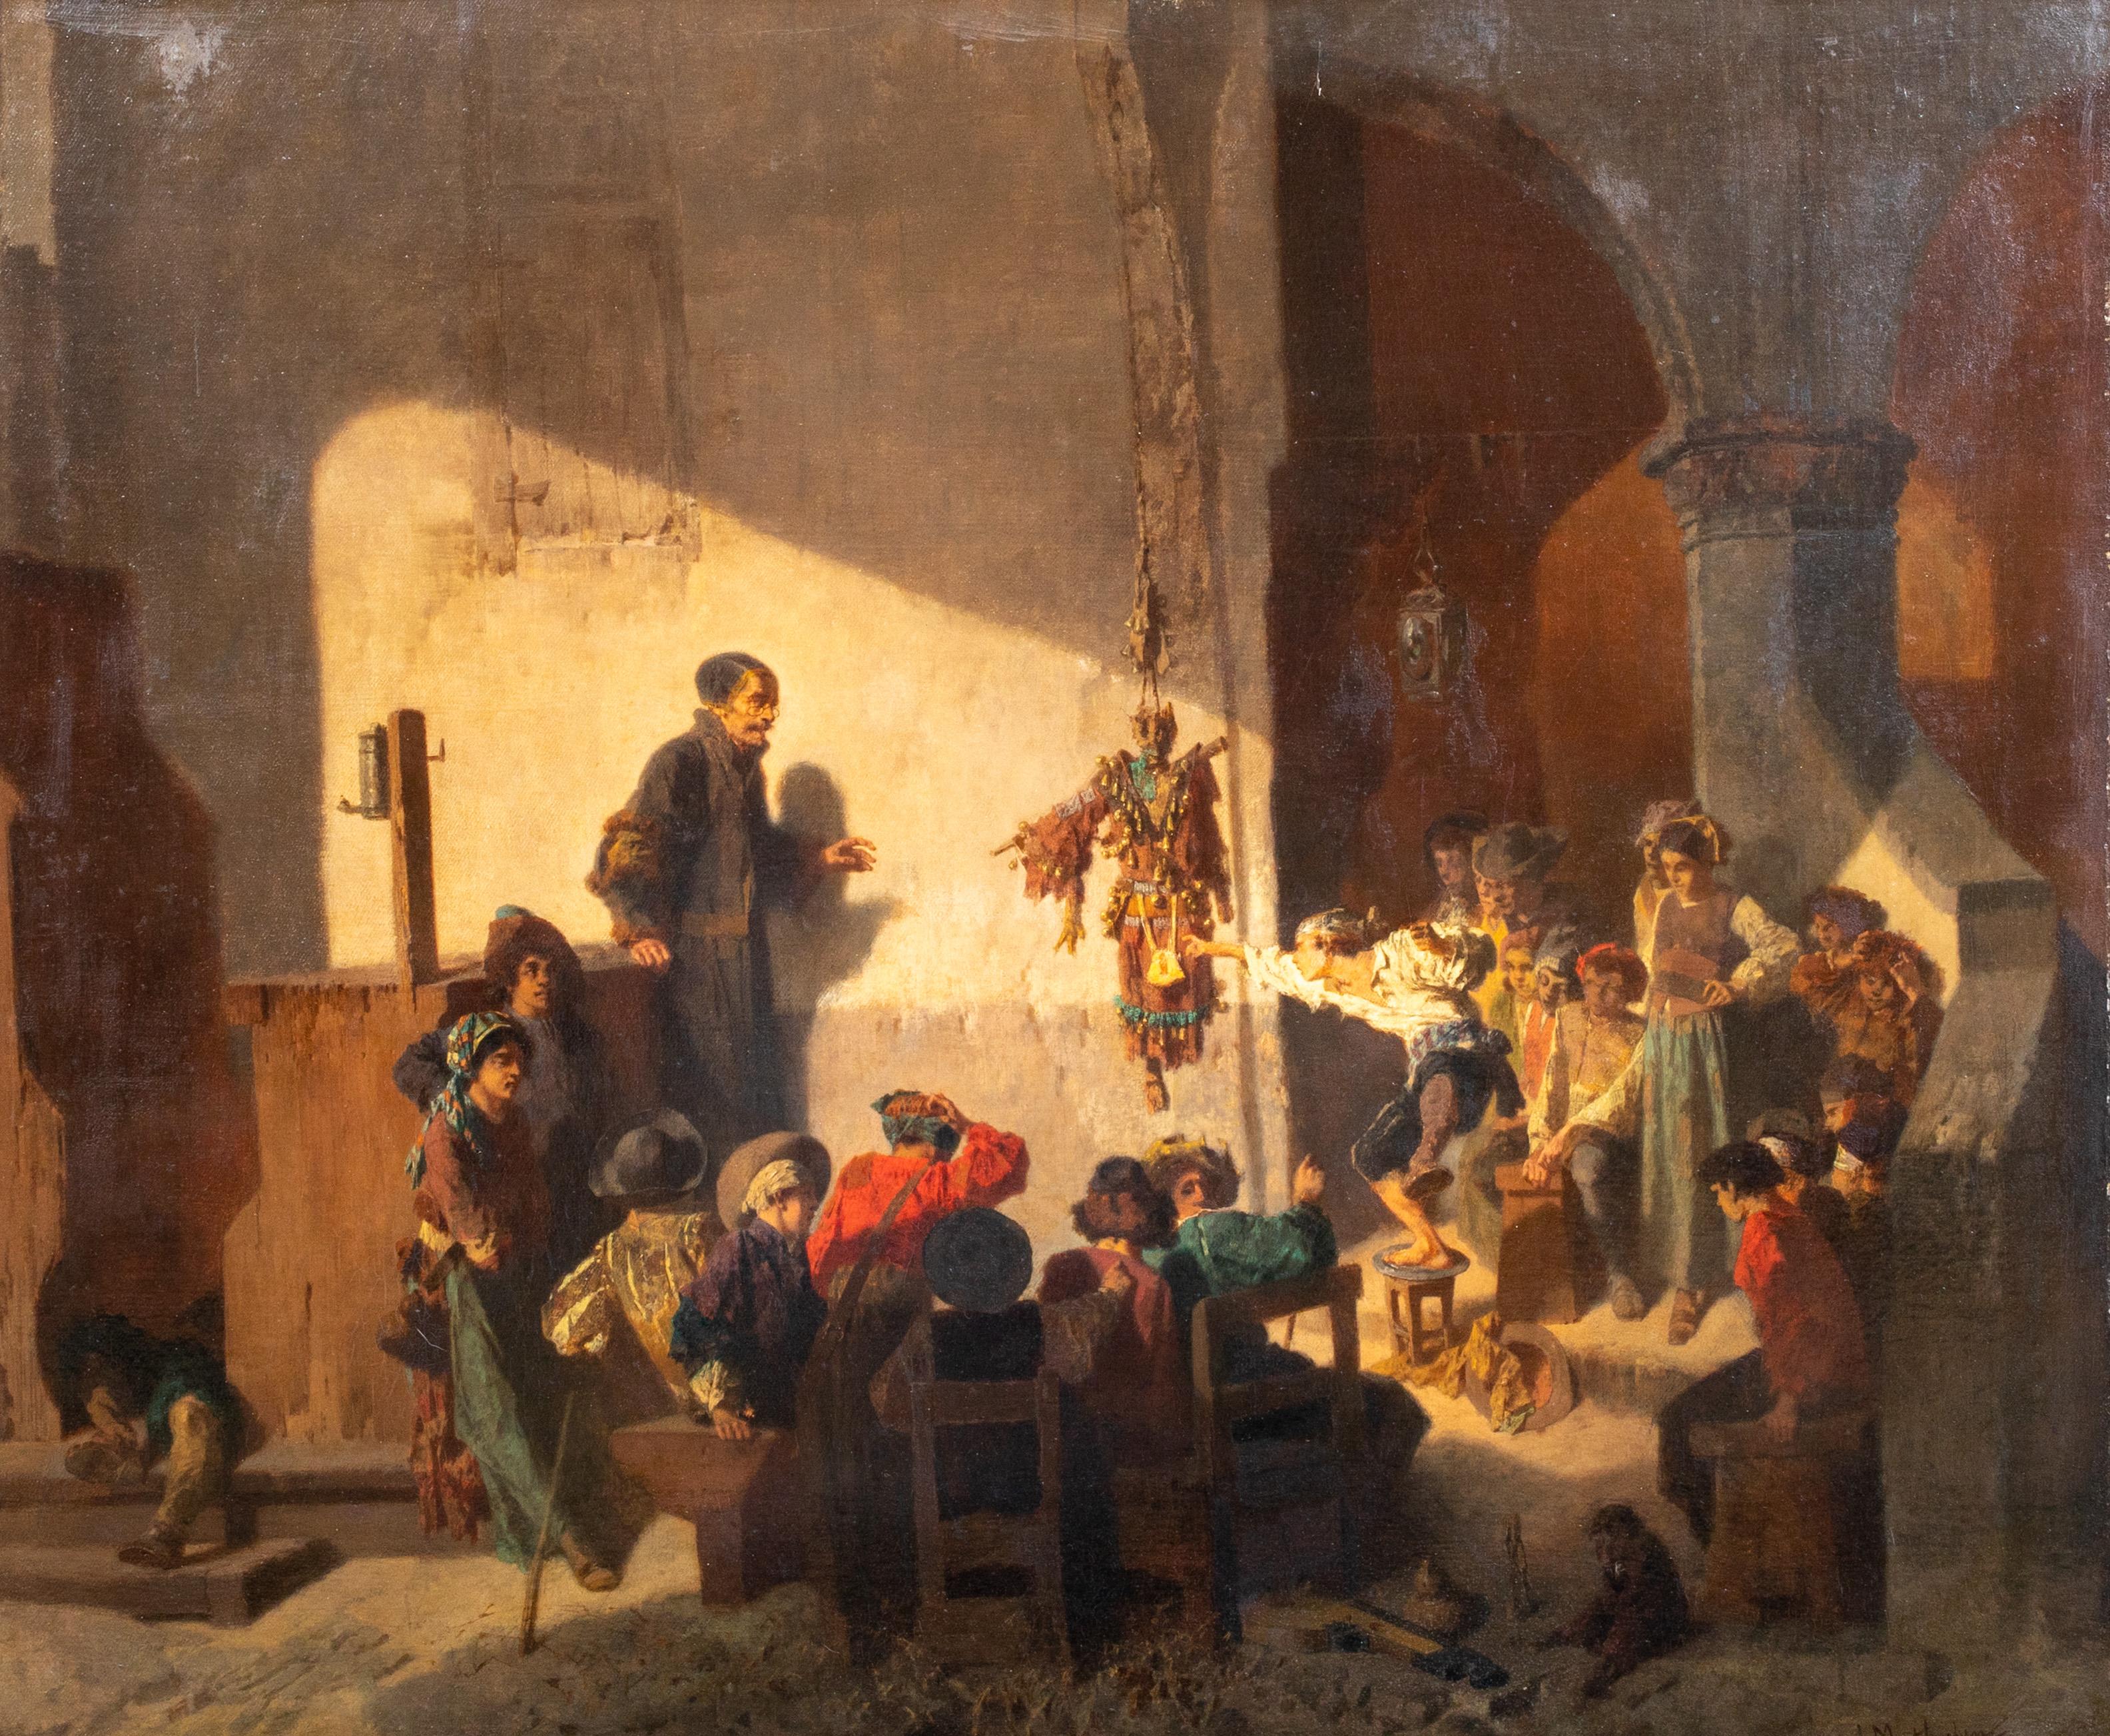 Unknown Portrait Painting - School Of Thieves, 19th Century